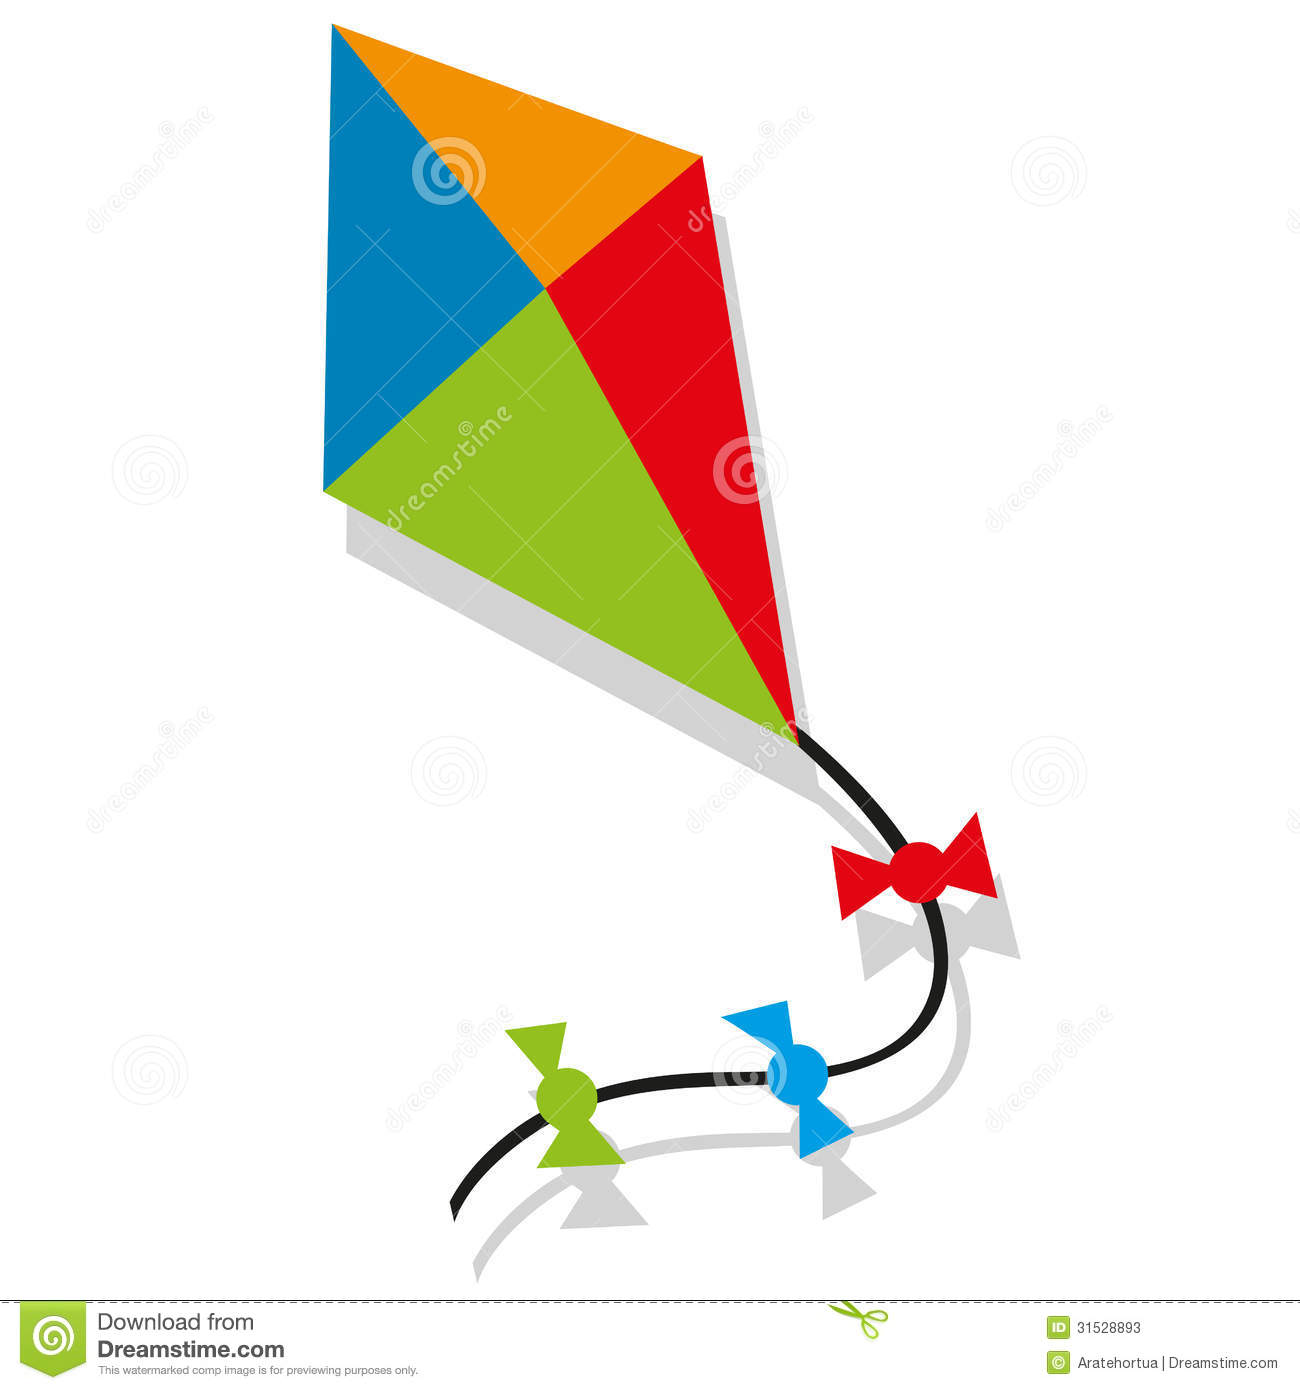 Colorfull Cartoon Vector Kite Blue Orange Green And Red